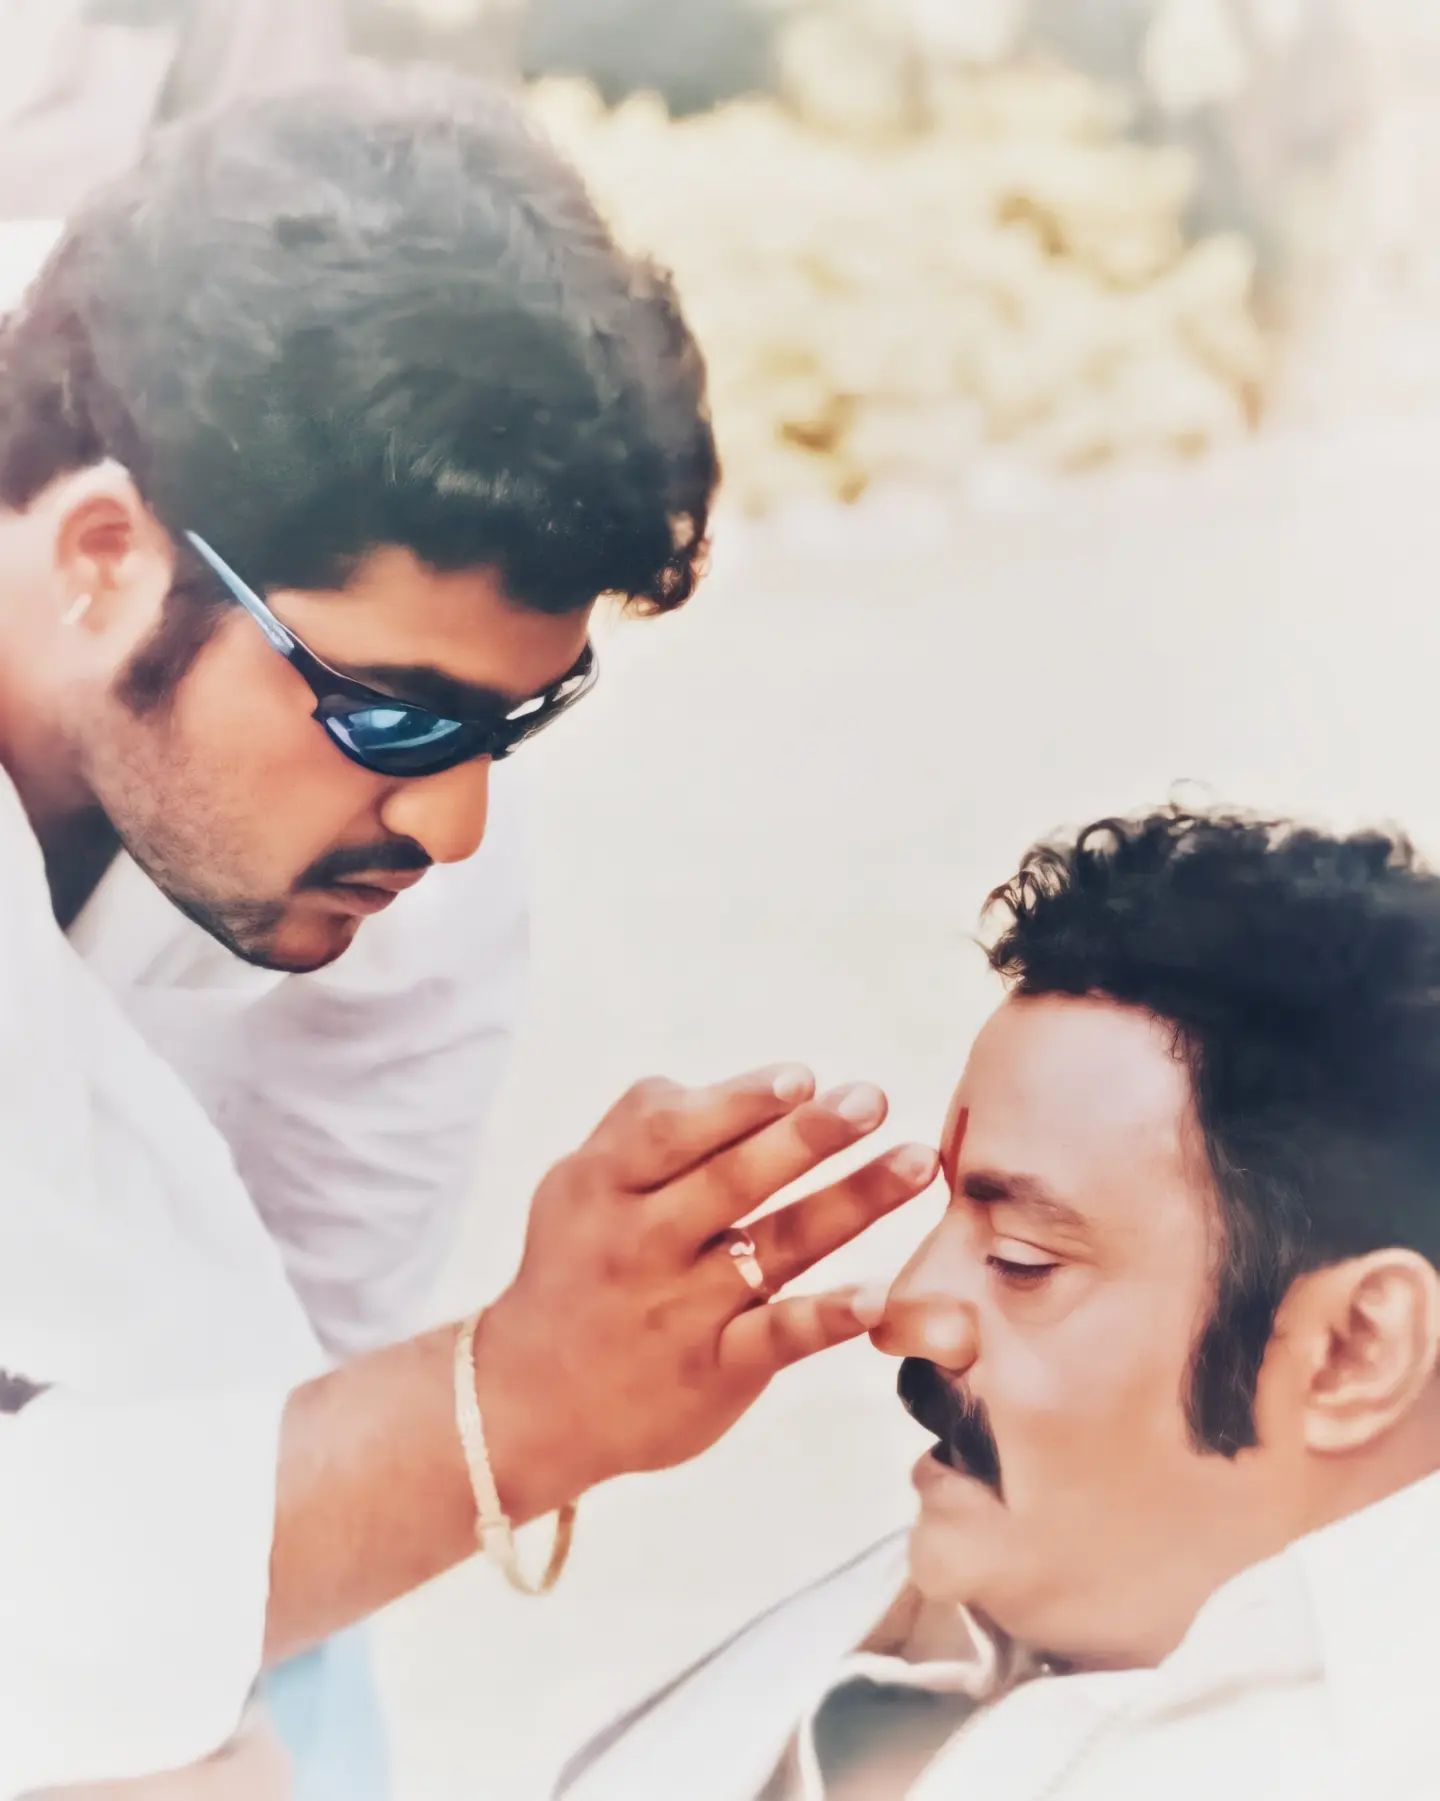 NTR Jr with his father